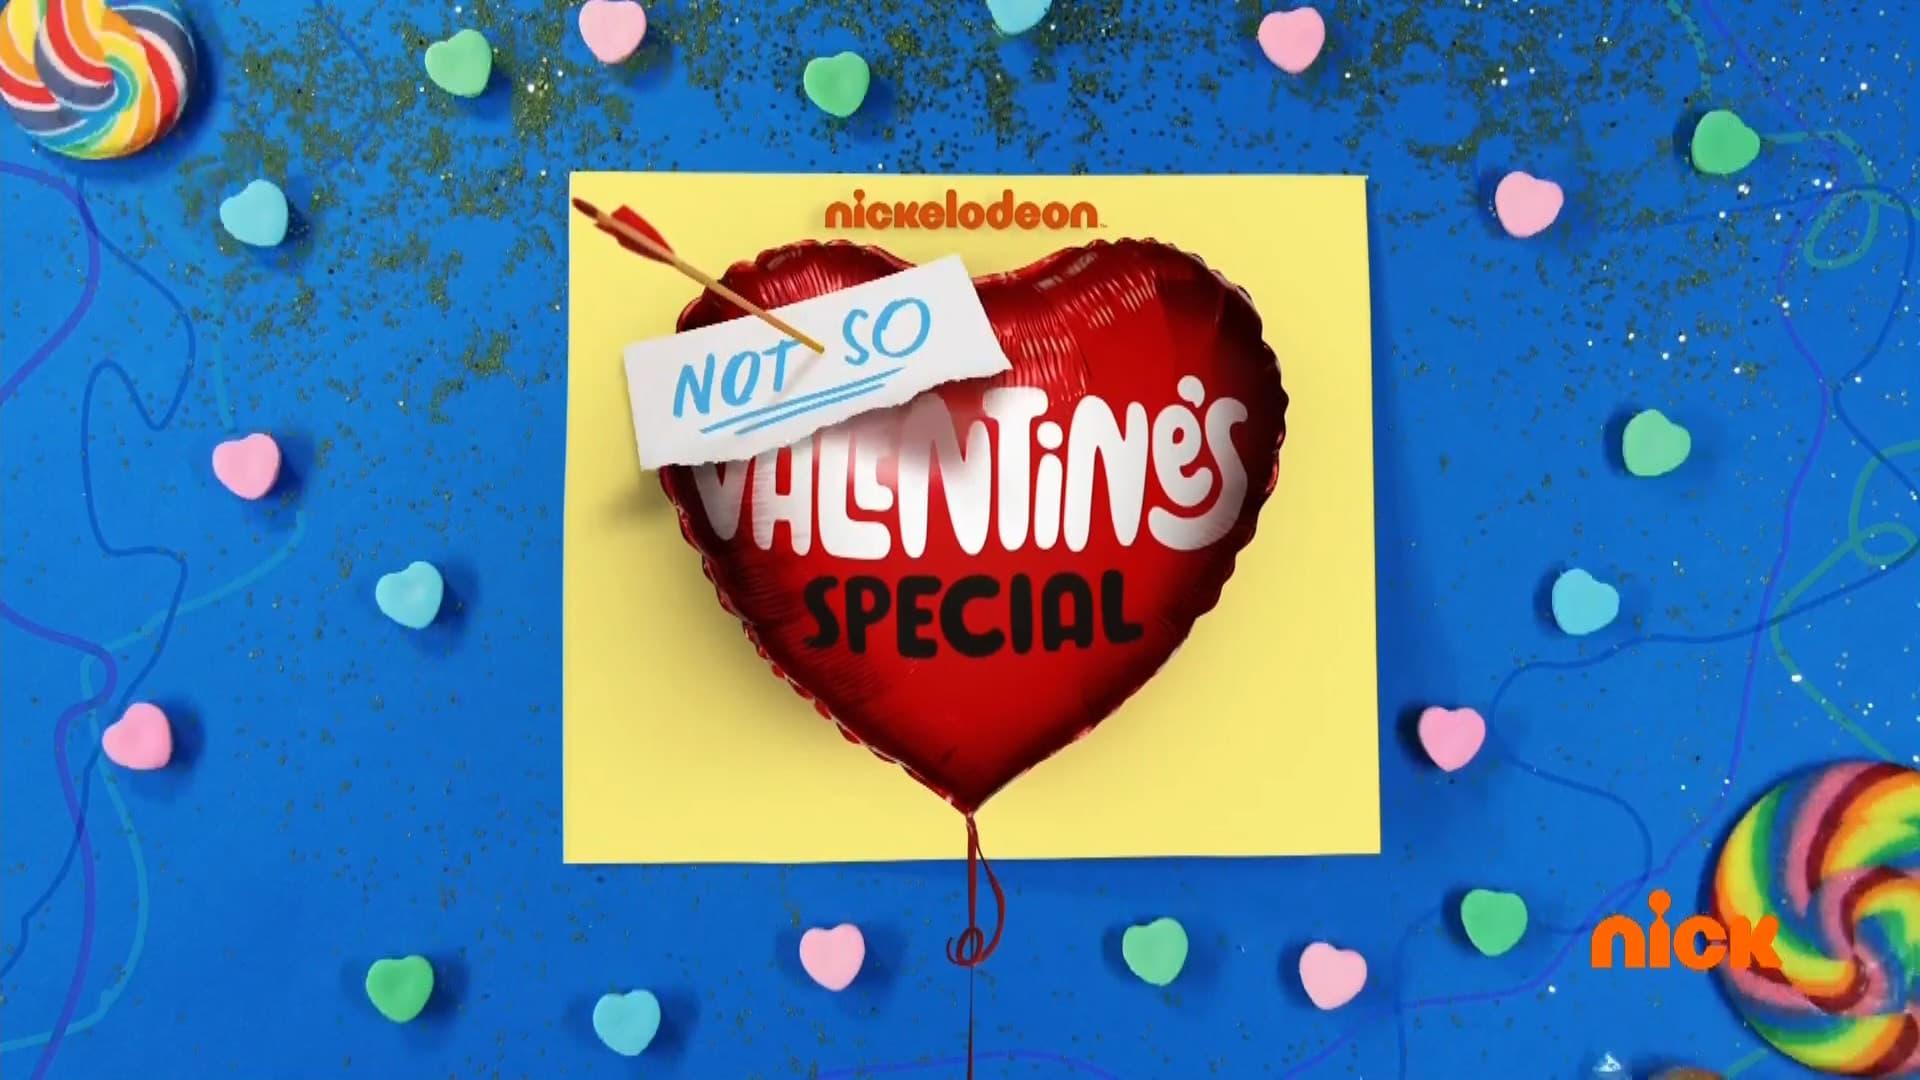 Nickelodeon's Not So Valentine's Special backdrop